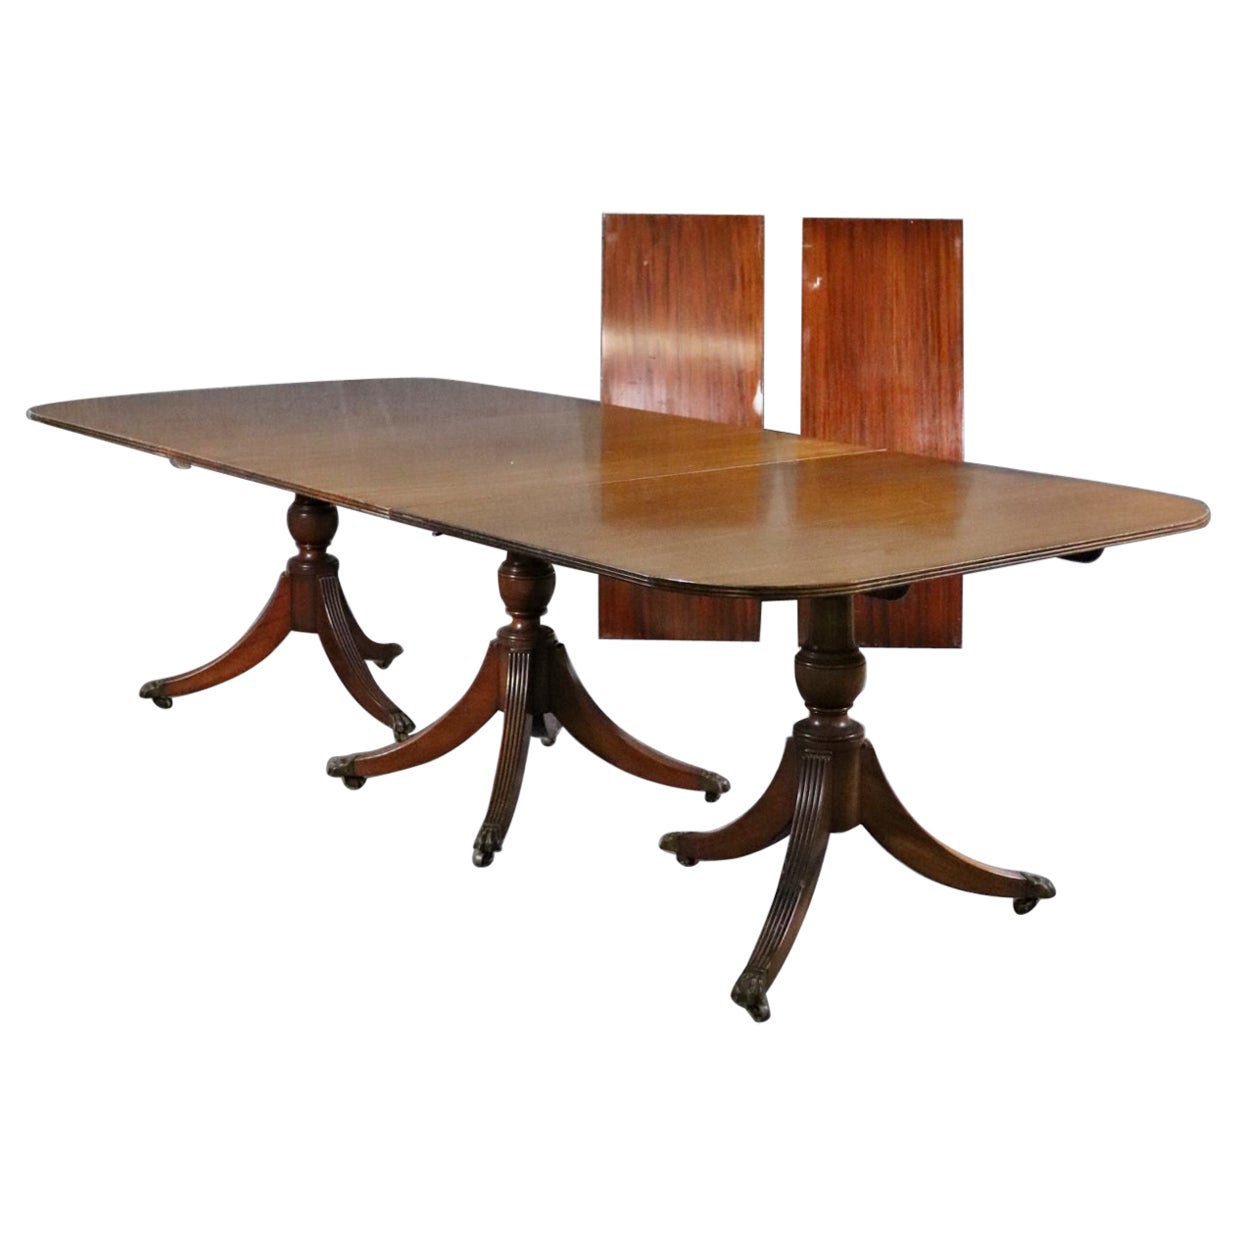 Plum Pudding Mahogany Banquet Dining Table with 2 leaves Manner Gillows For Sale